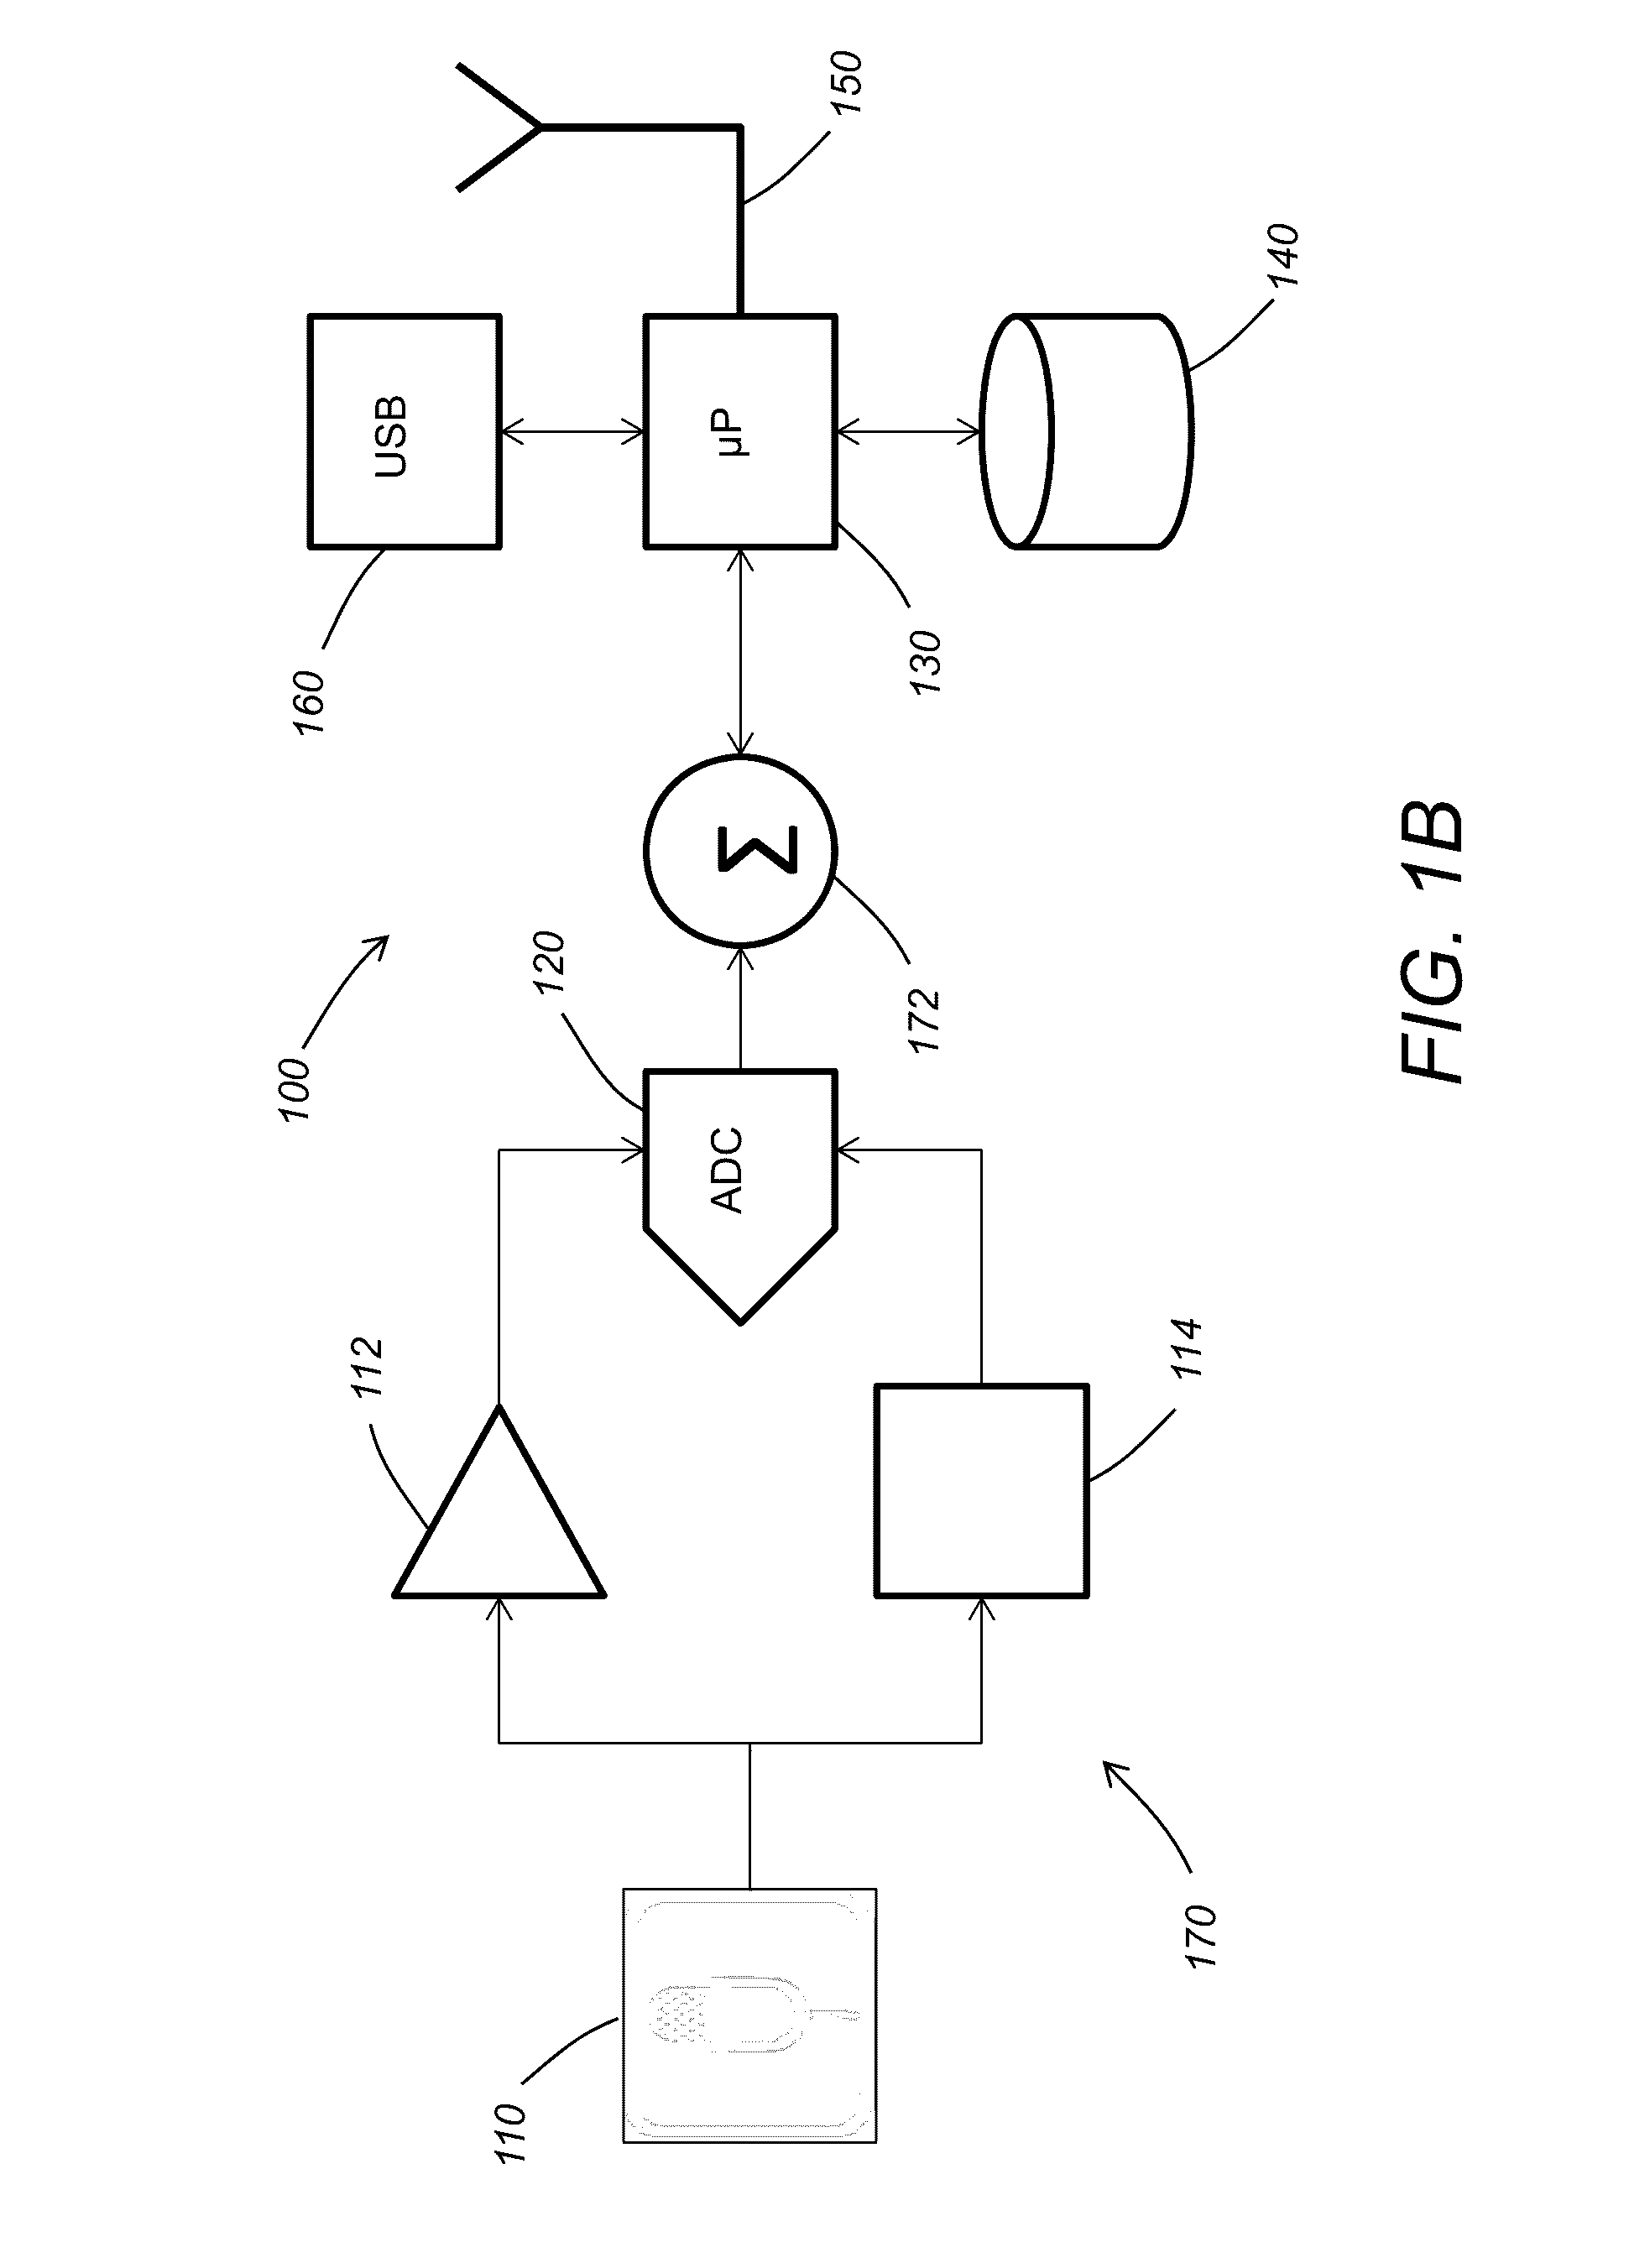 Methods and apparatus for recording impulsive sounds